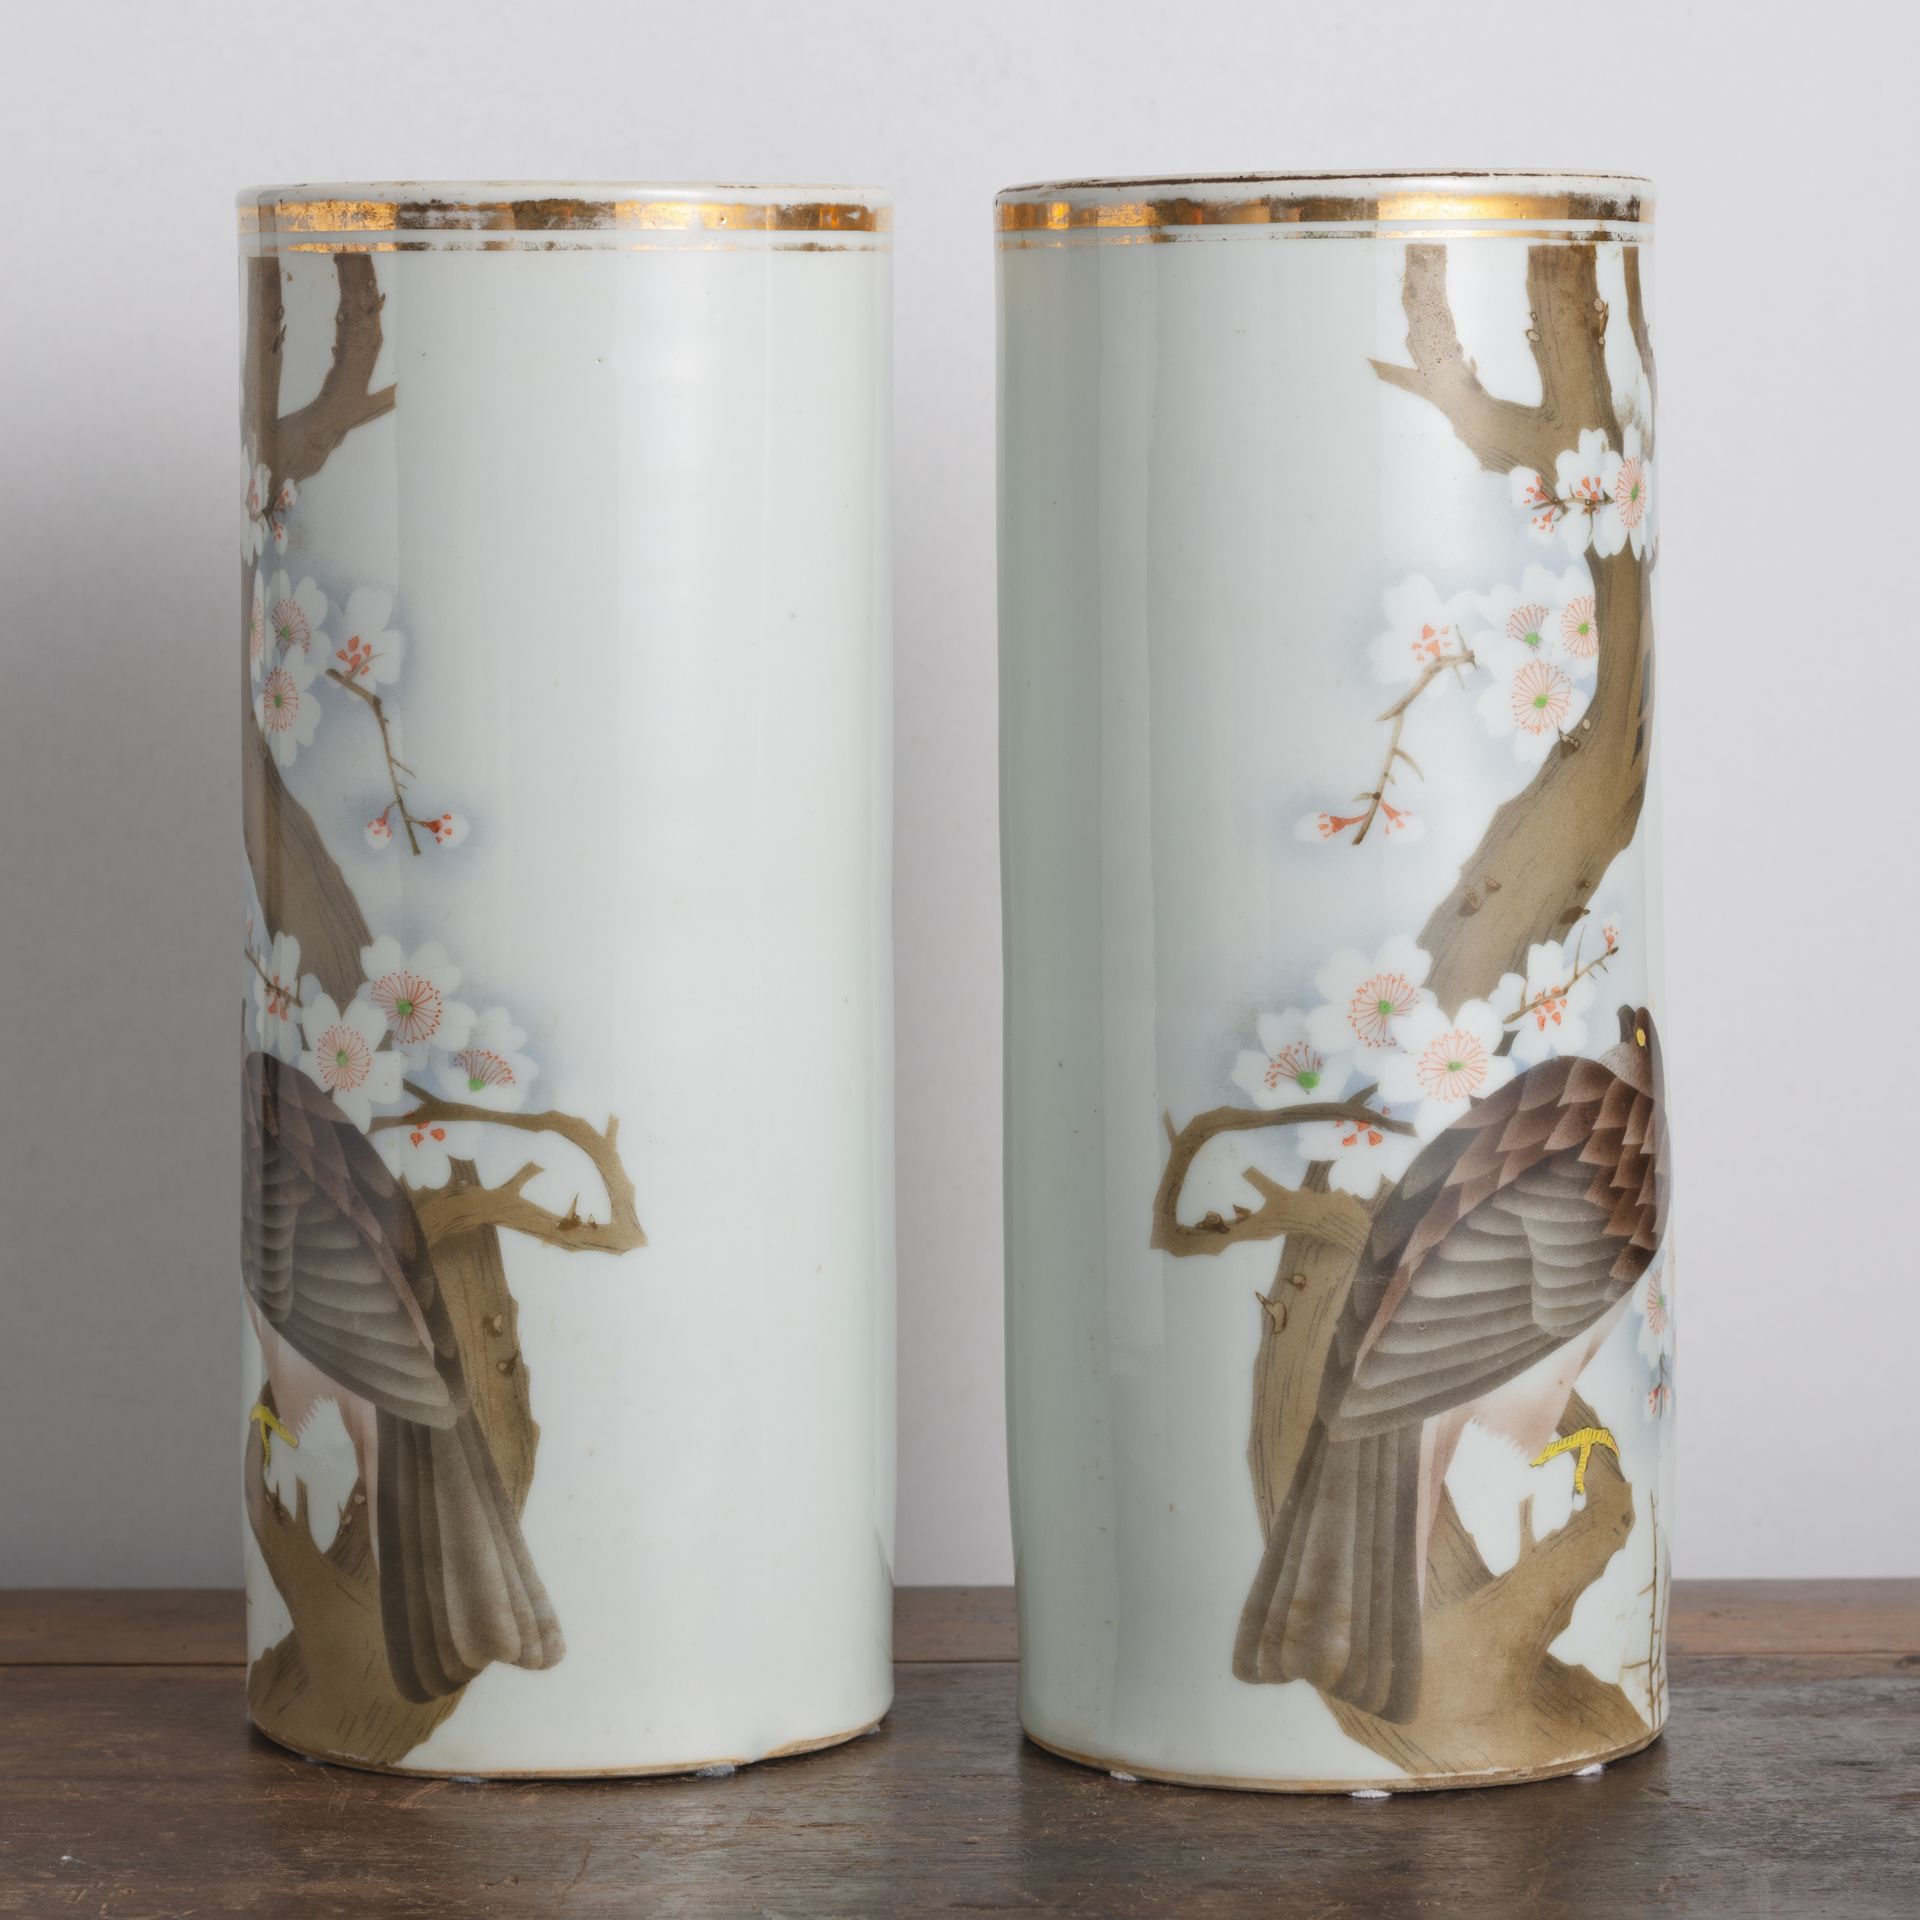 A PAIR OF CYLINDRICAL POLYCHROME BIRD OF PREY ON BRANCHES PORCELAIN VASES - Image 4 of 6